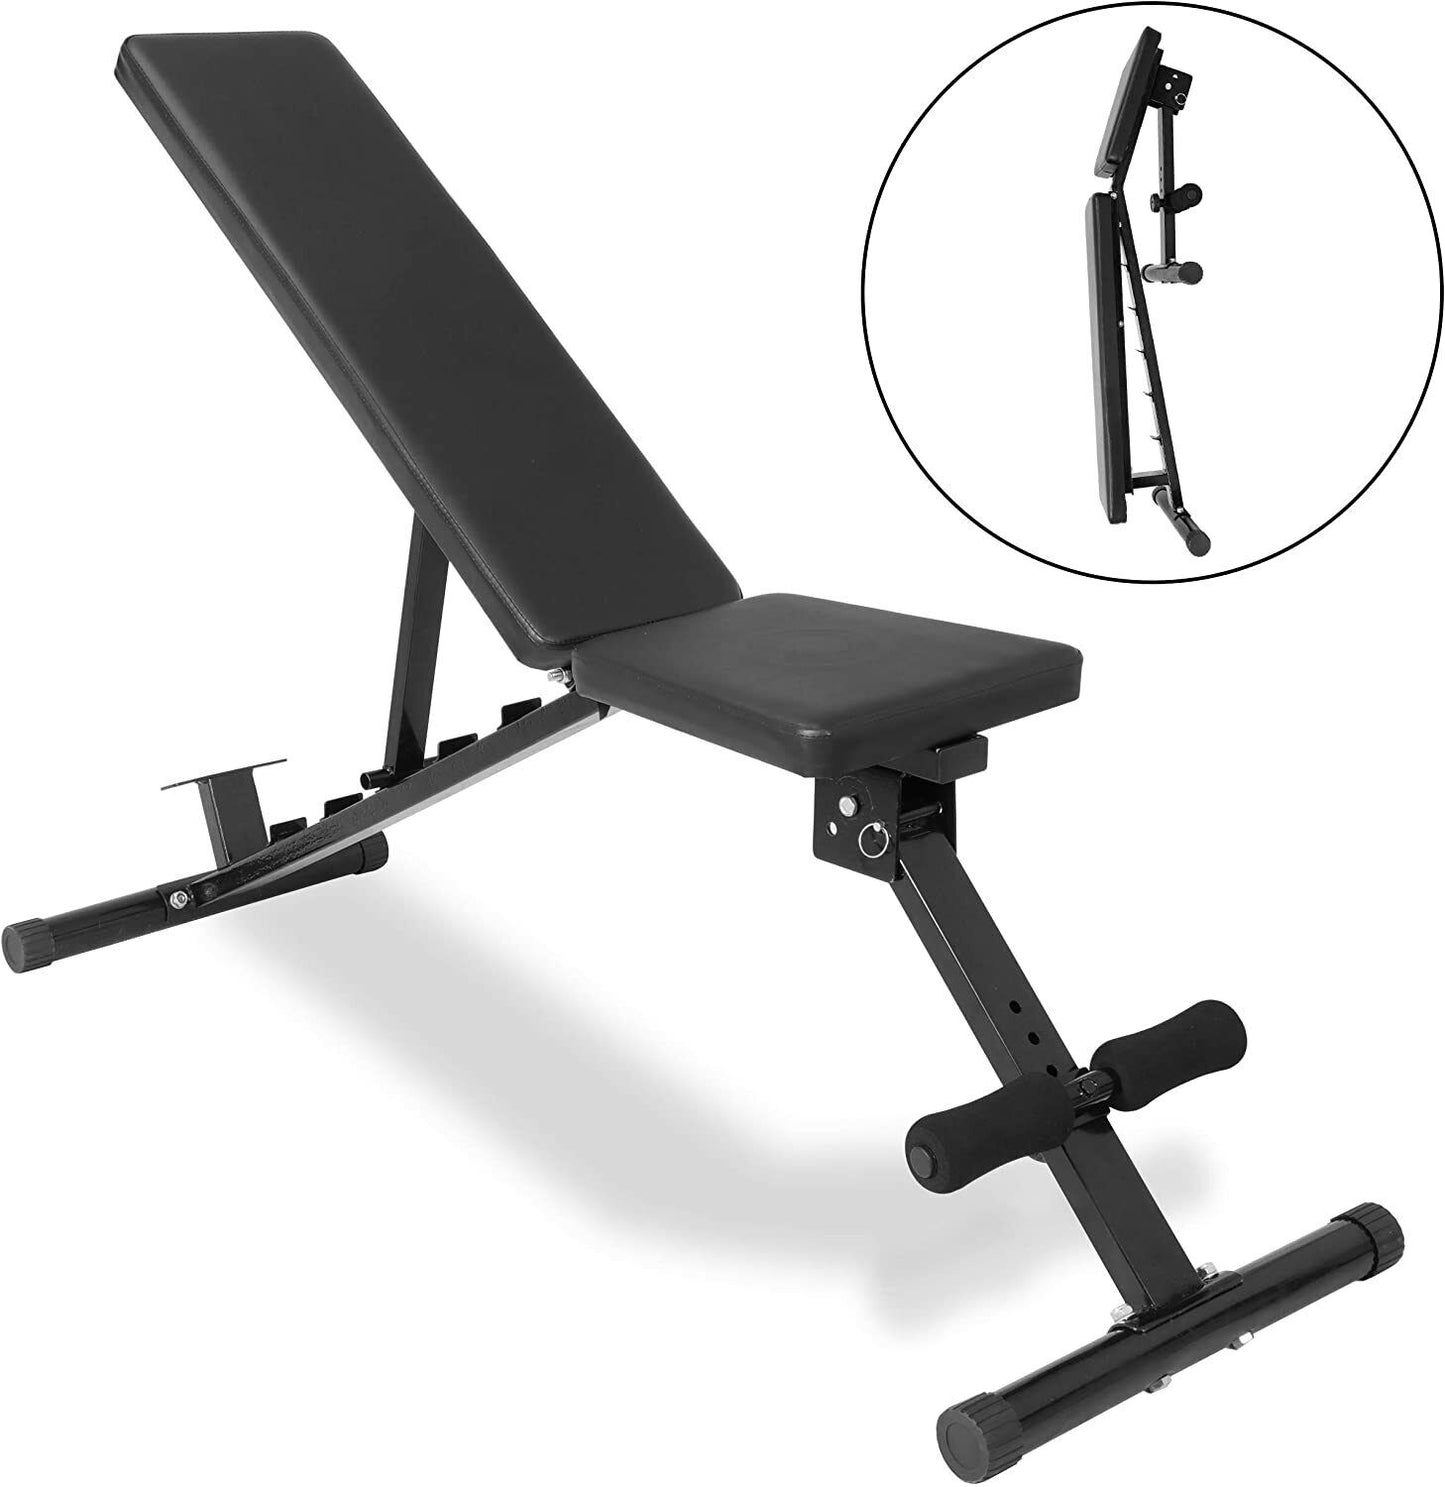 Weight Bench Adjustable Workout Exercise Bench 700 lbs Home Gym Fitness Utility